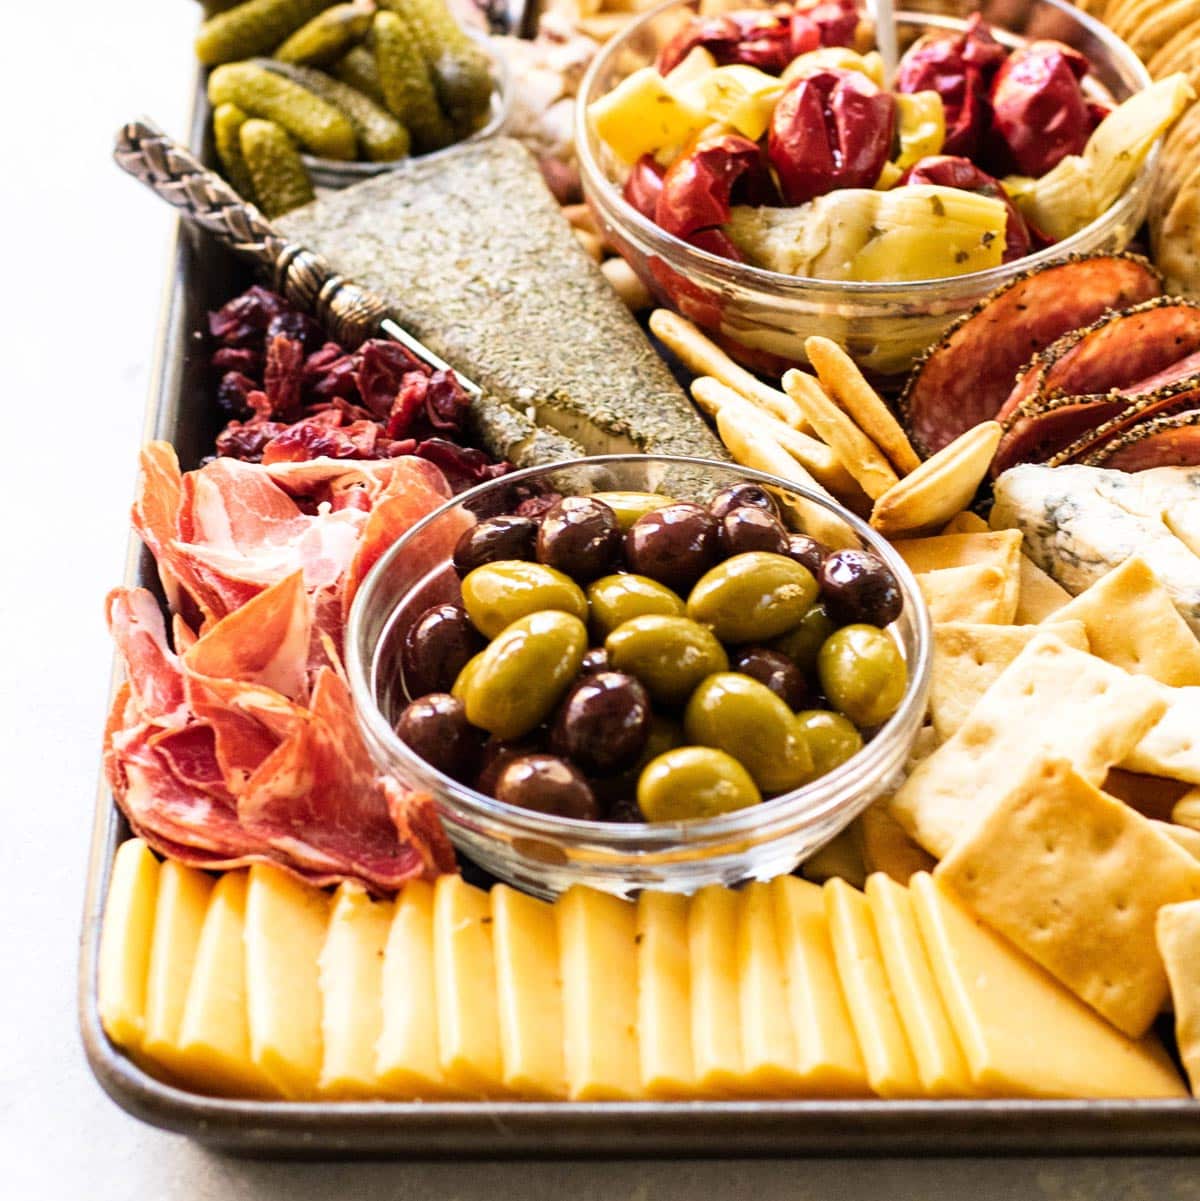 a cheeseboard with different types of cheese, crackers, cured meat, and olives.